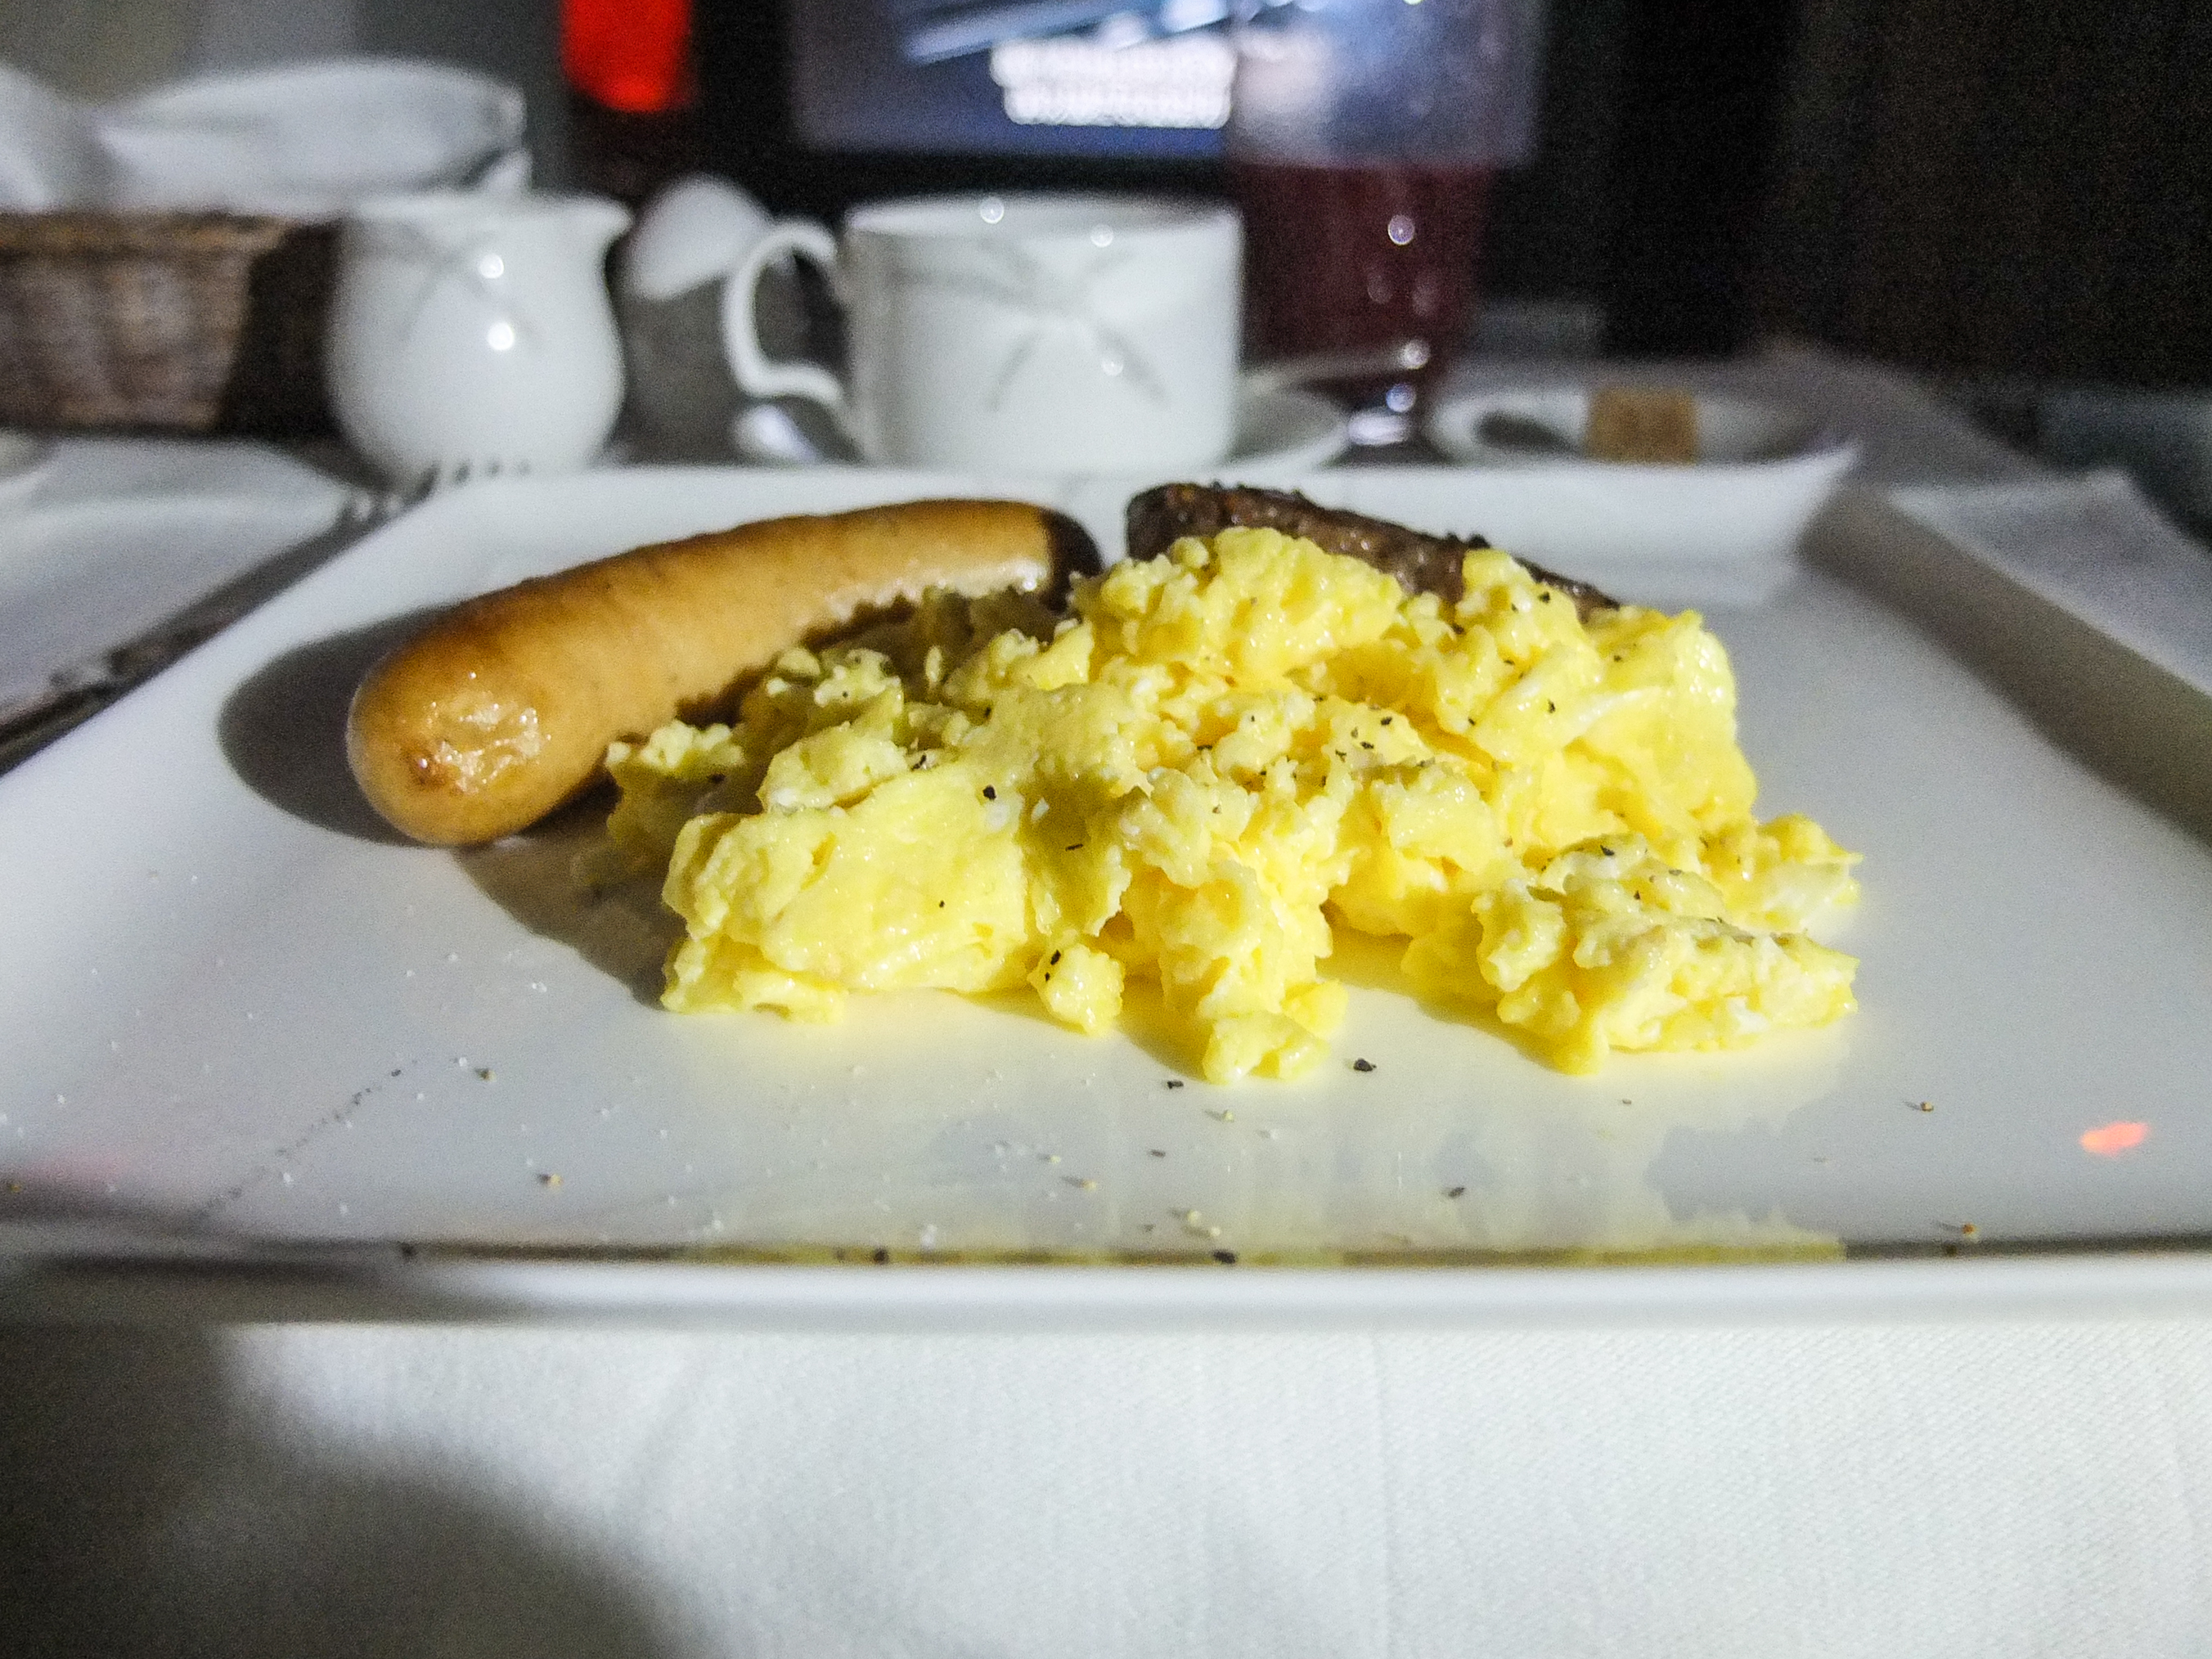 a plate of scrambled eggs and sausage